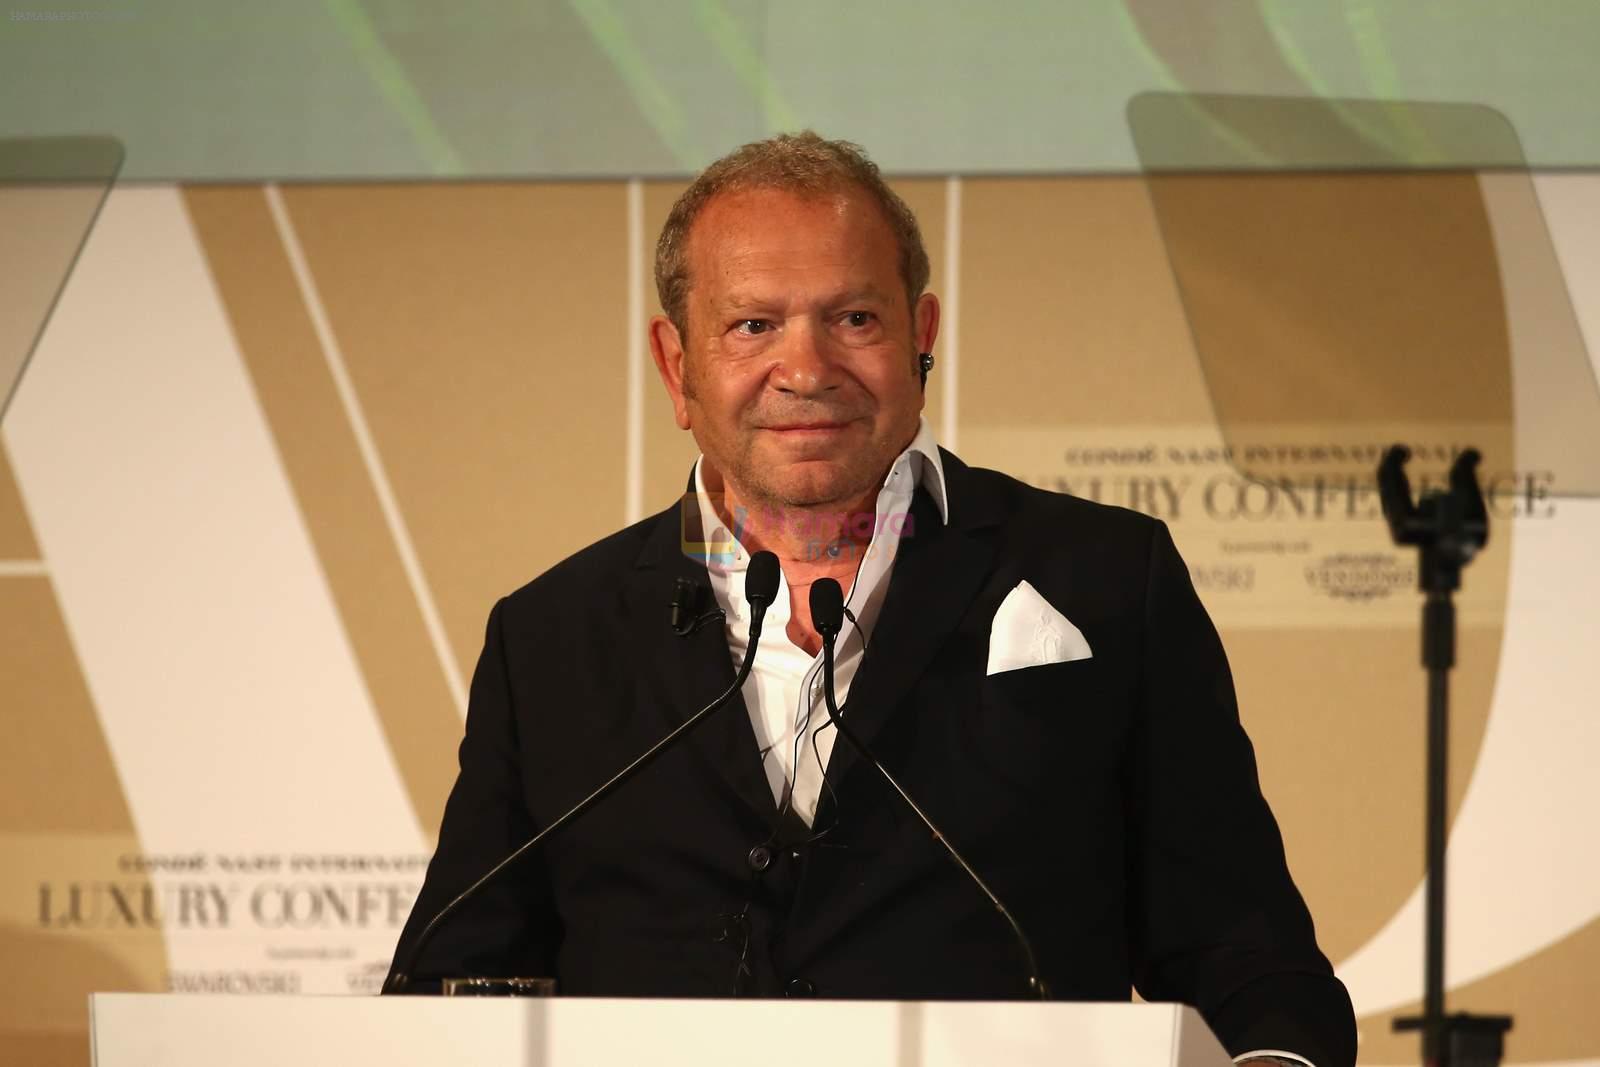 at Condenast Luxury conference  on 30th April 2015